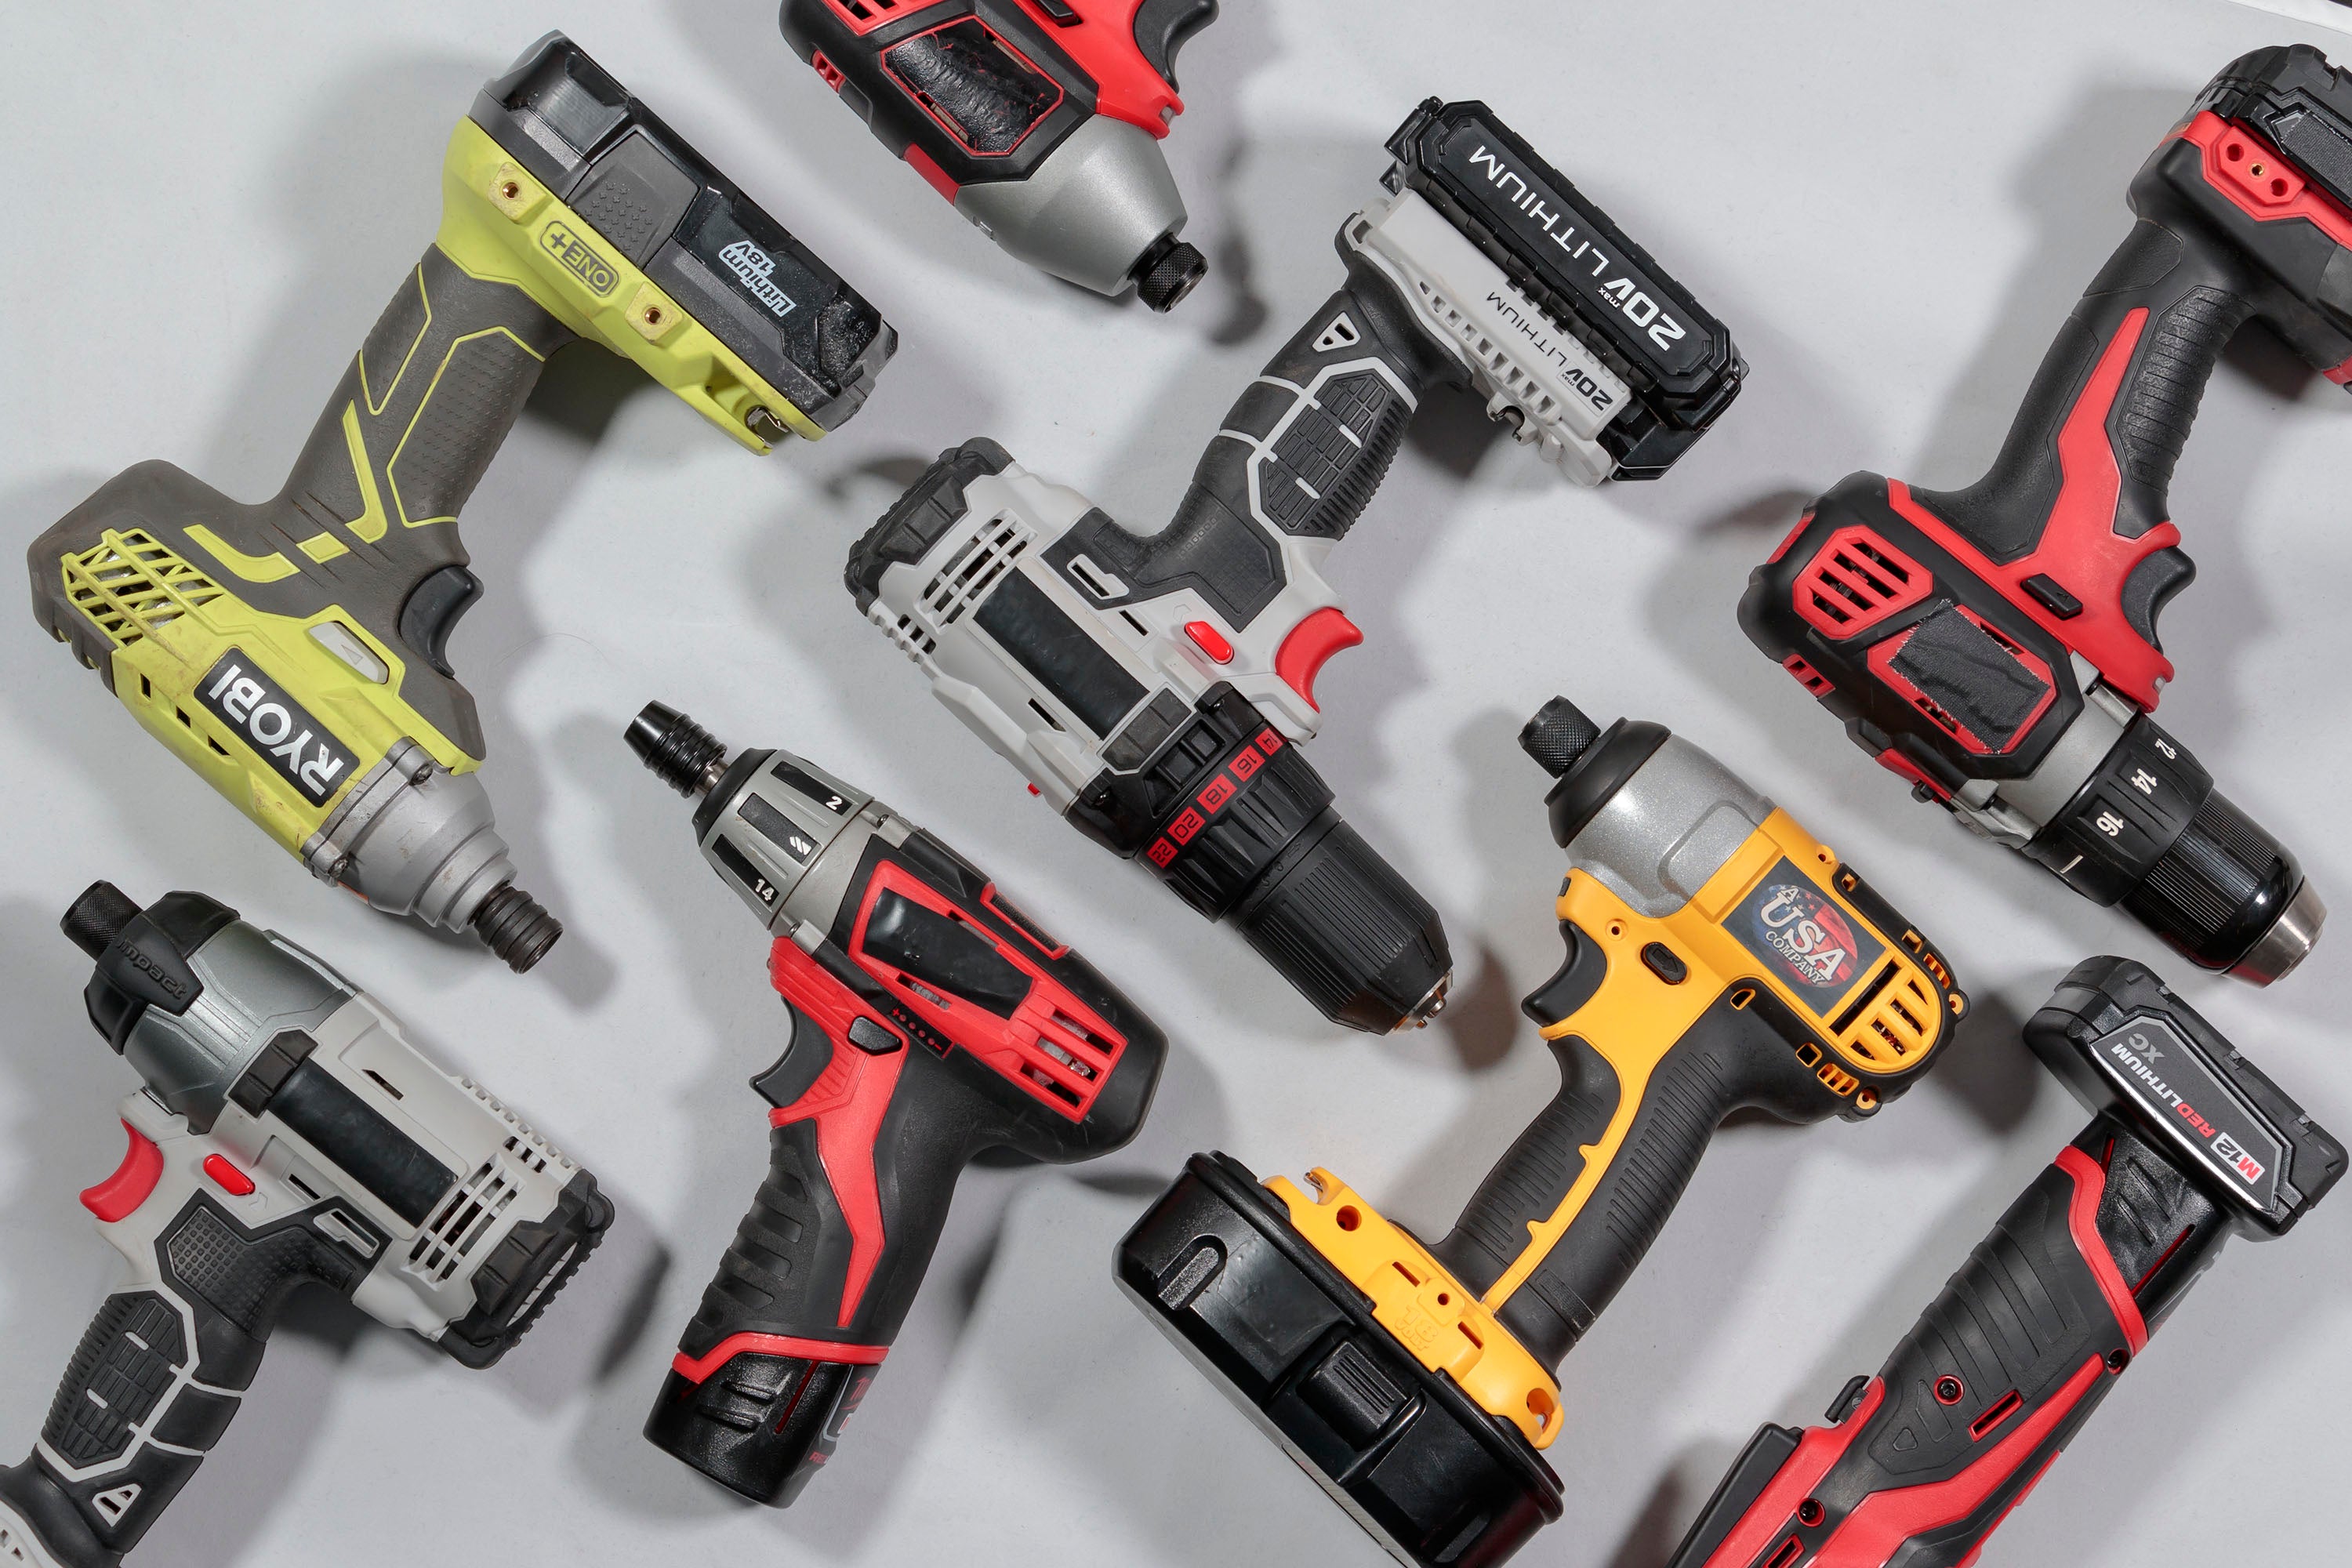 “What Drill Is Best for Me?” What to Consider When Buying a Cordless Drill